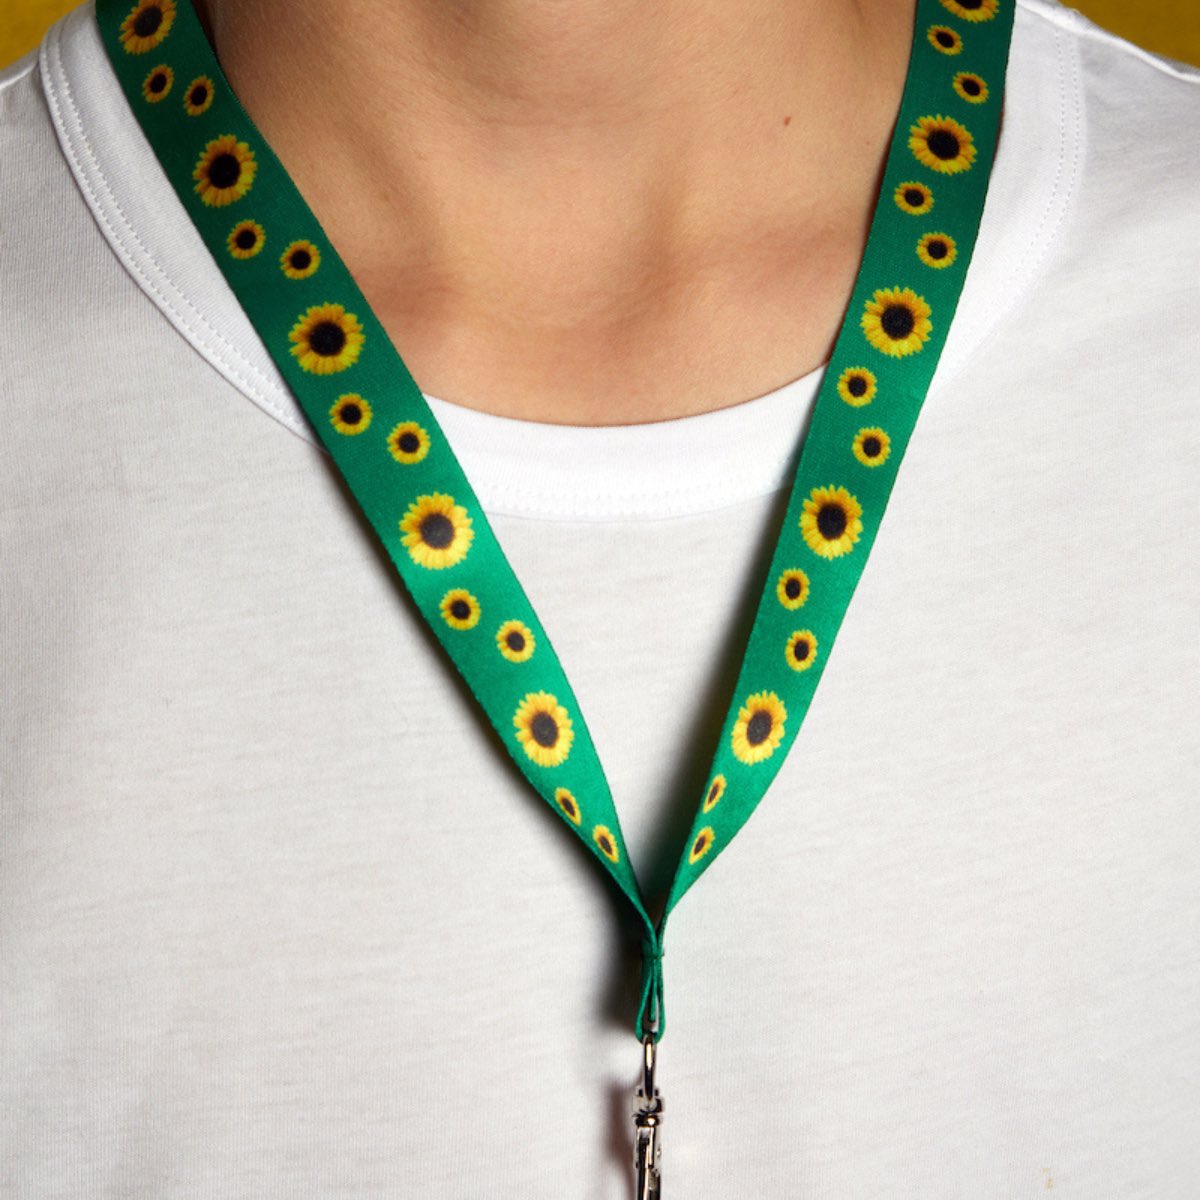 At #LarnakaAirport and #PafosAirport our goal is to continuously improve the services provided to all our #customers. The #sunflower lanyards are available for passengers with hidden disabilities traveling through Cyprus Airports. #CyprusAirports #HermesAirports